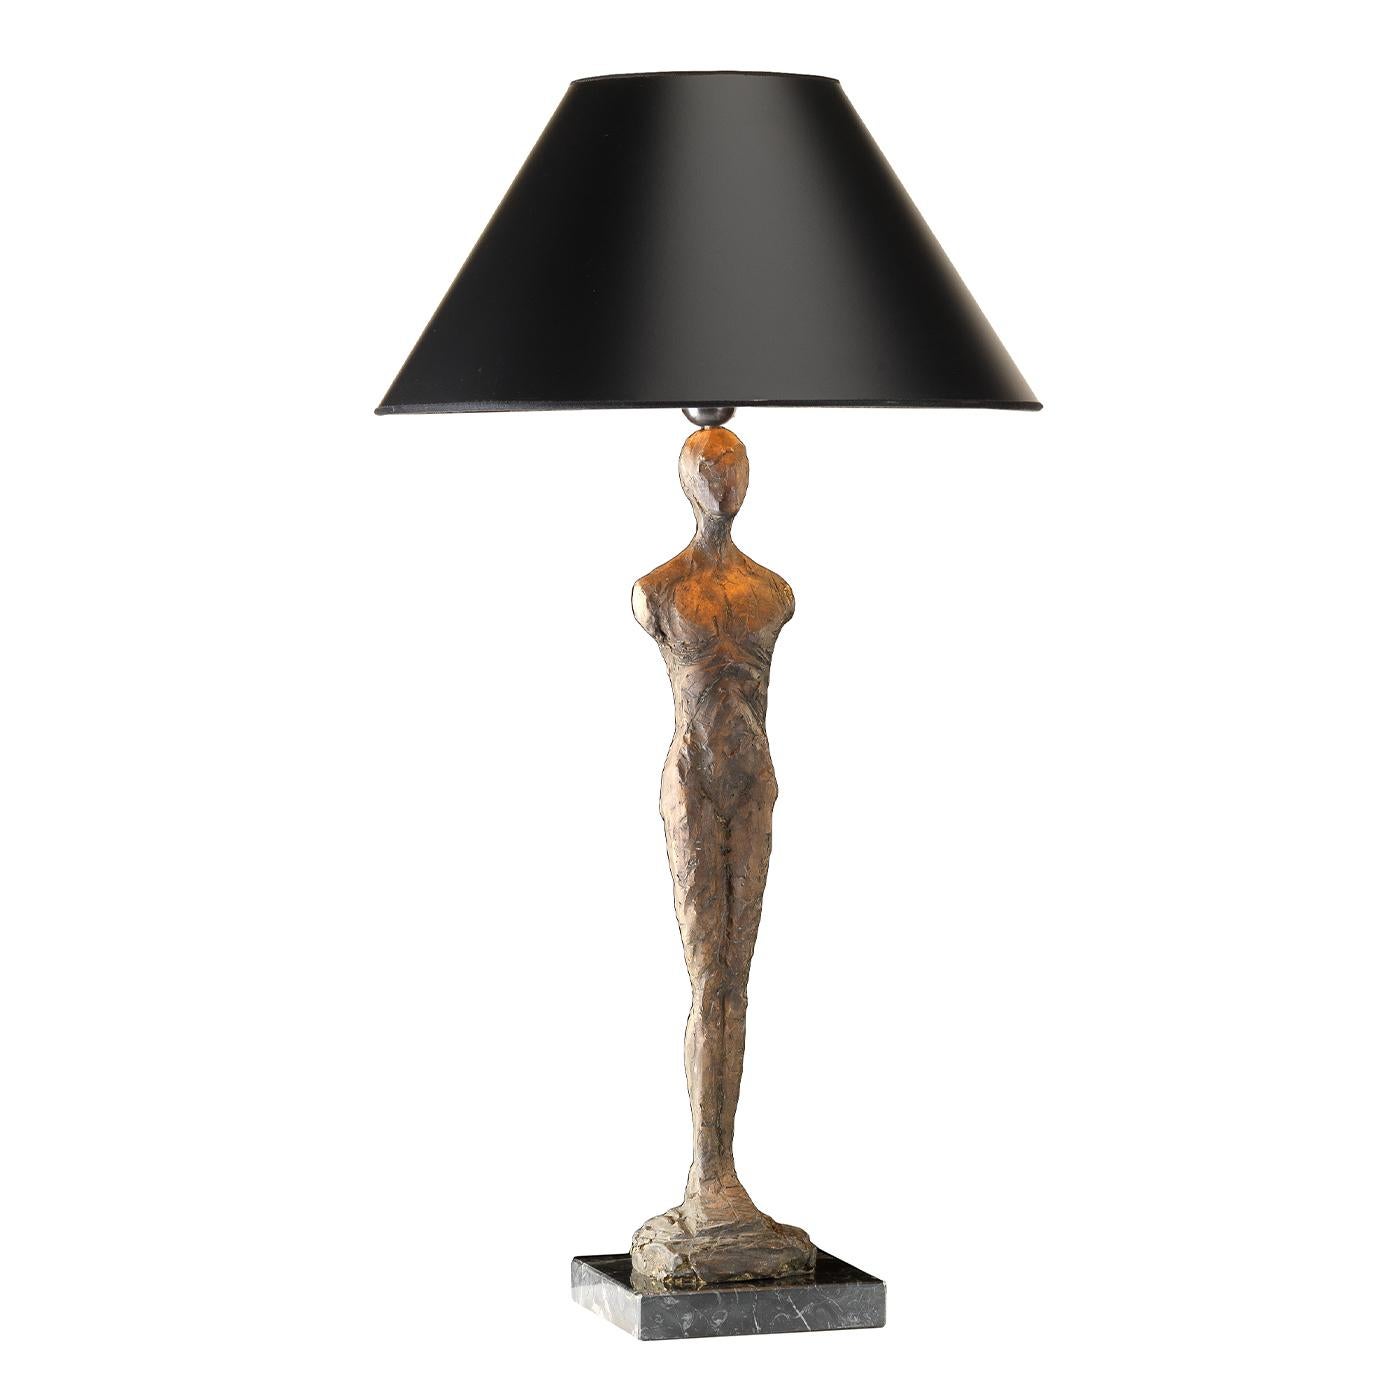 The Him Lamp combines functionality with design all-in-one. Comprised of a marble base supporting a stunning cast-bronze statuette of a stylized male figure, this piece will provide ambient light with its strong presence, as a standalone piece or